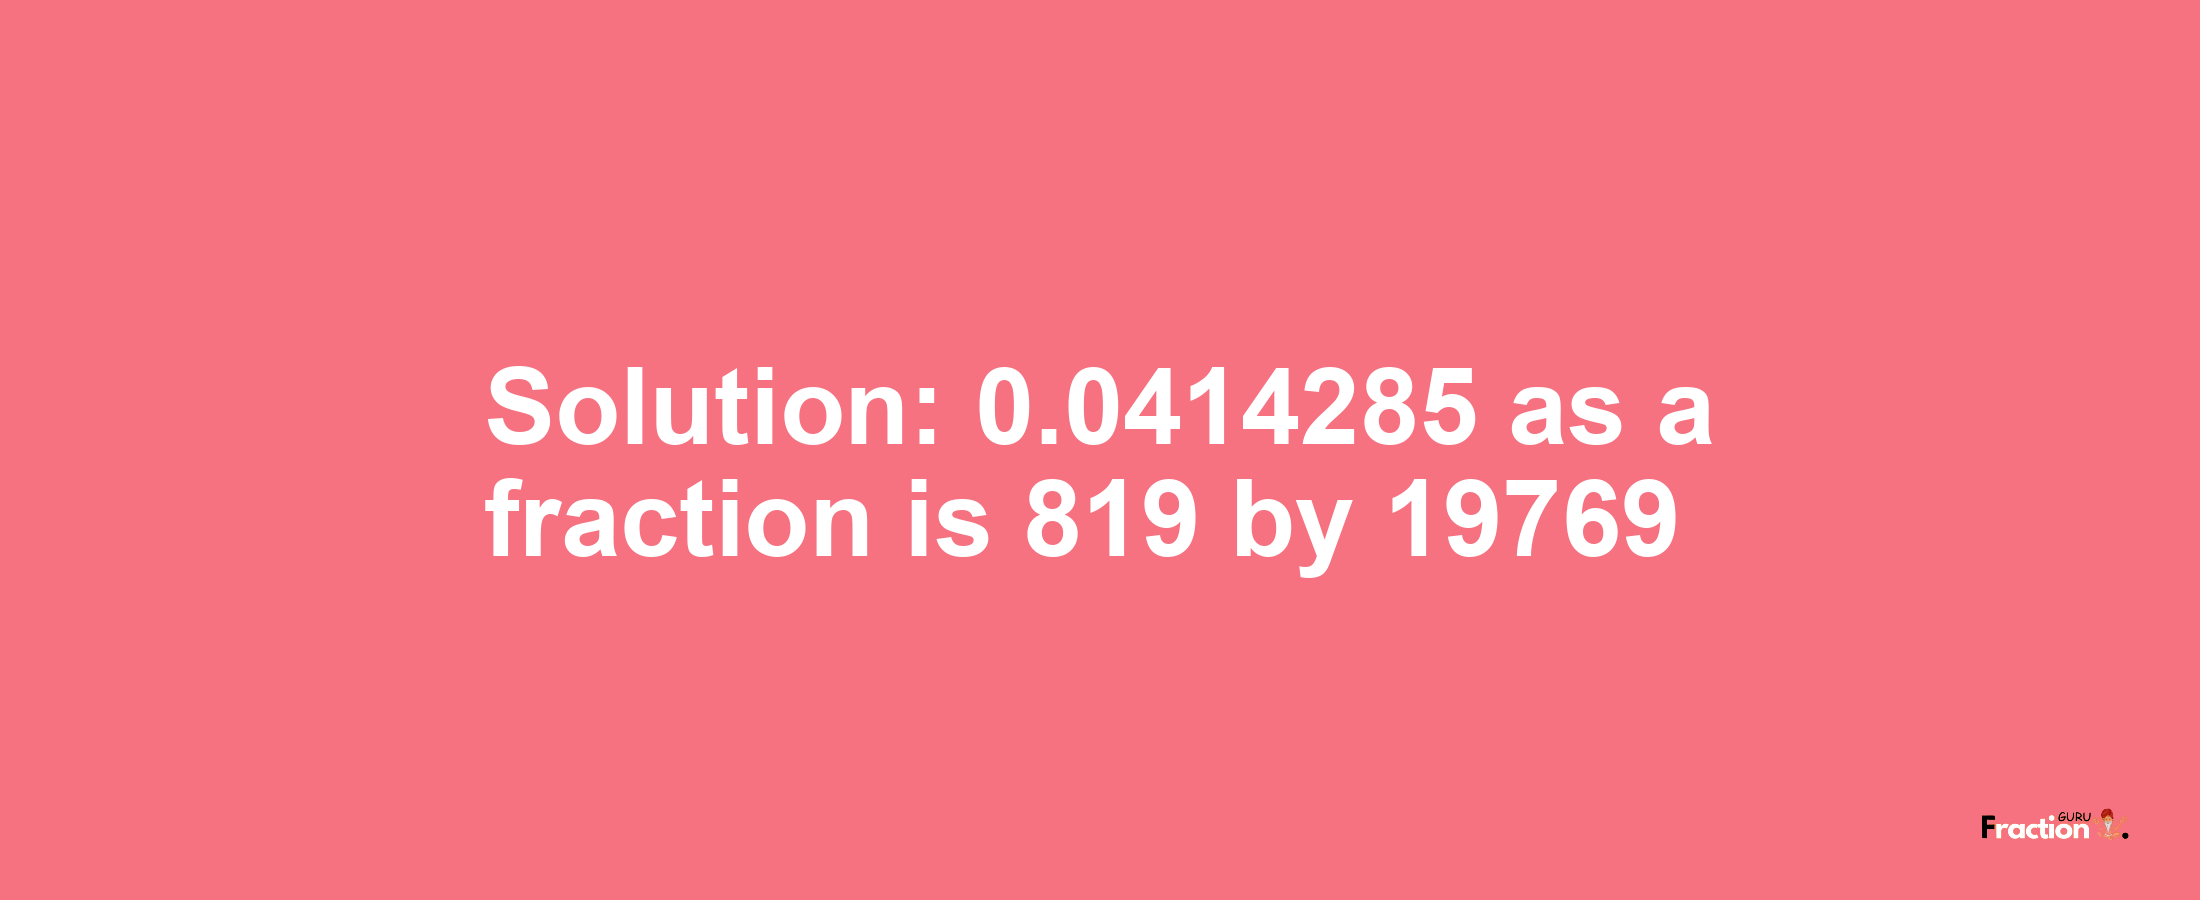 Solution:0.0414285 as a fraction is 819/19769